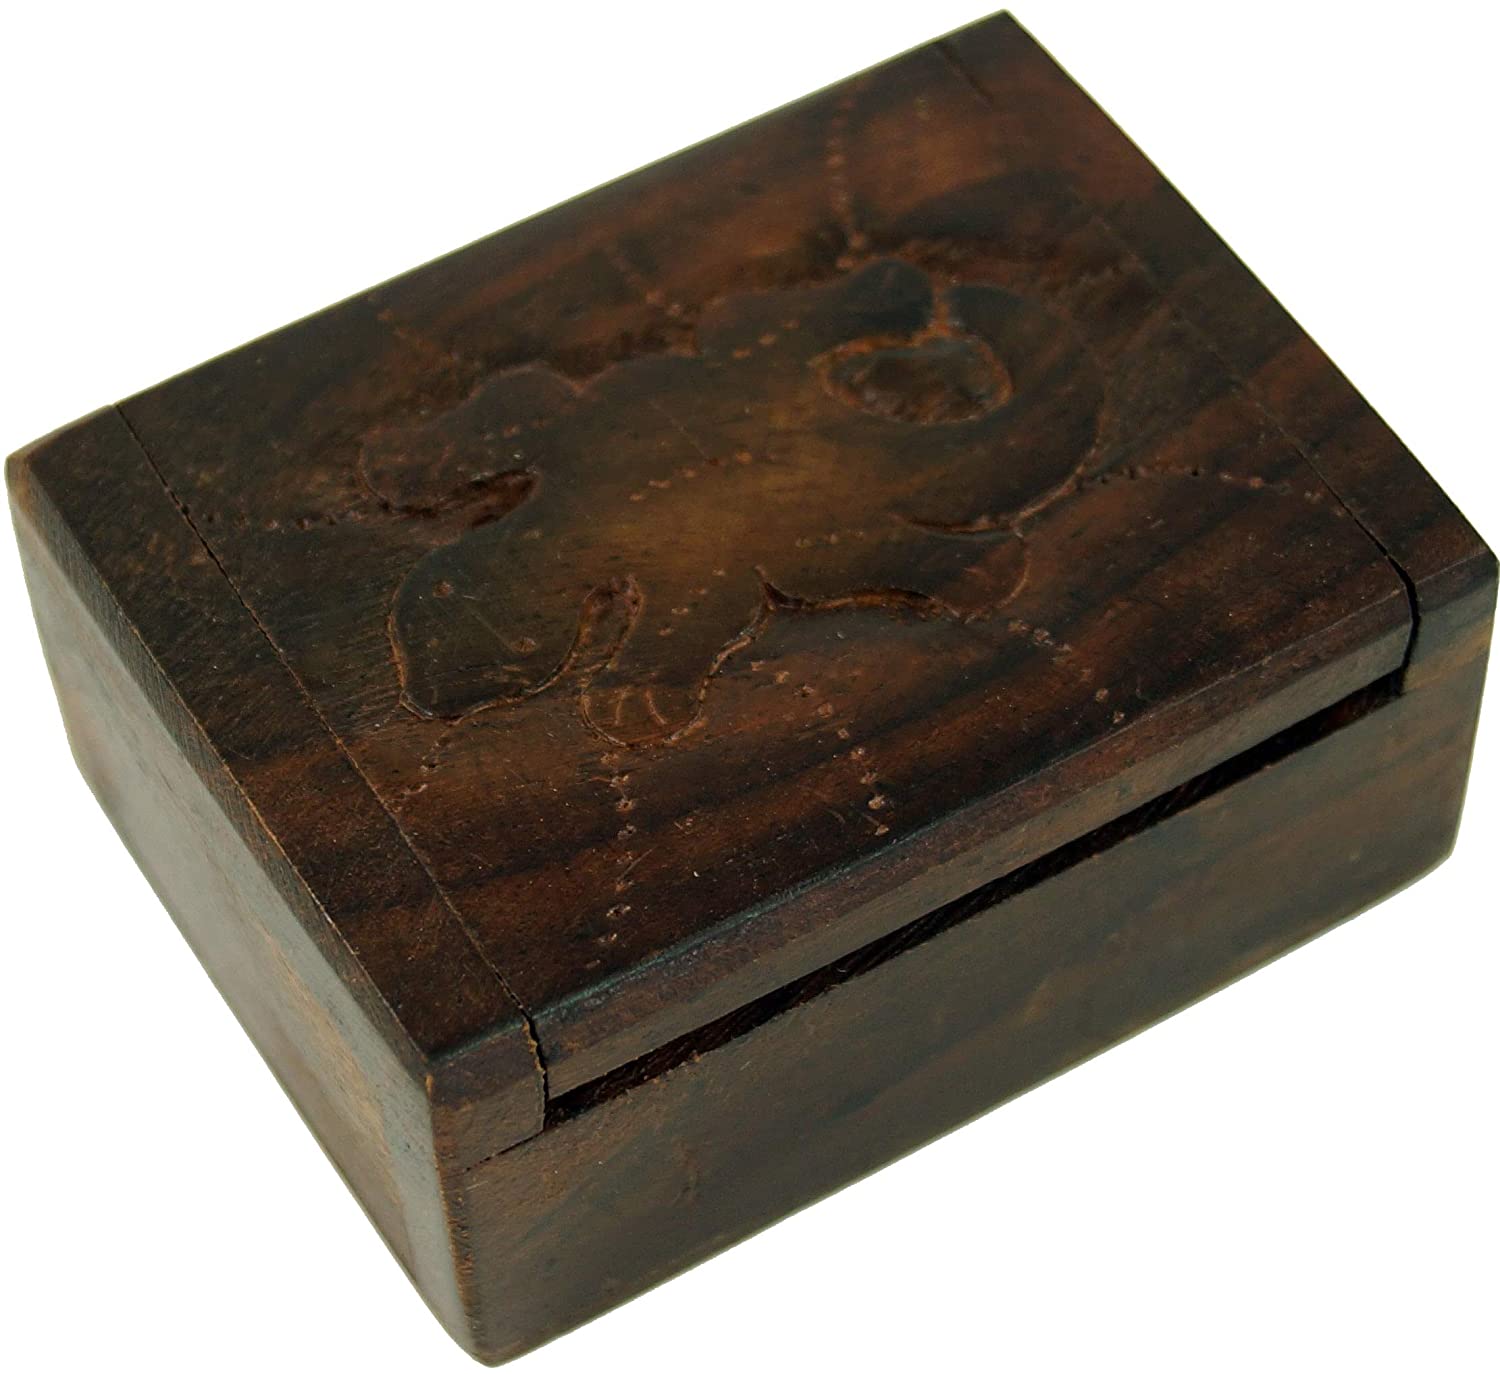 Guru-Shop Carved Wooden Treasure Chest Jewellery Box In 2 Sizes, Tins